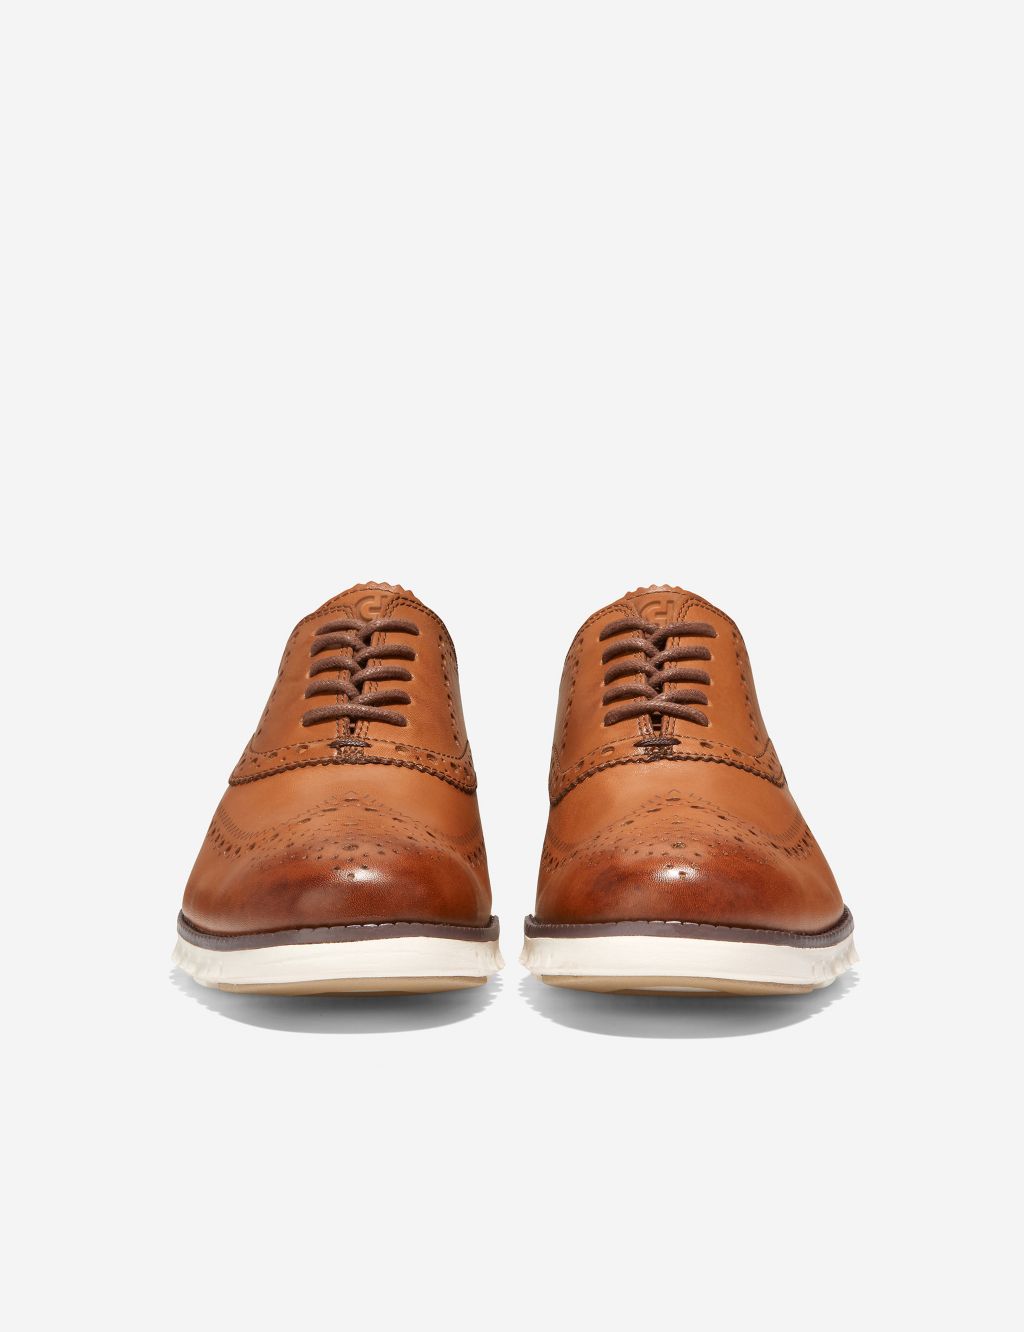 Wide Fit Zerogrand Wingtip Oxford Shoes image 5